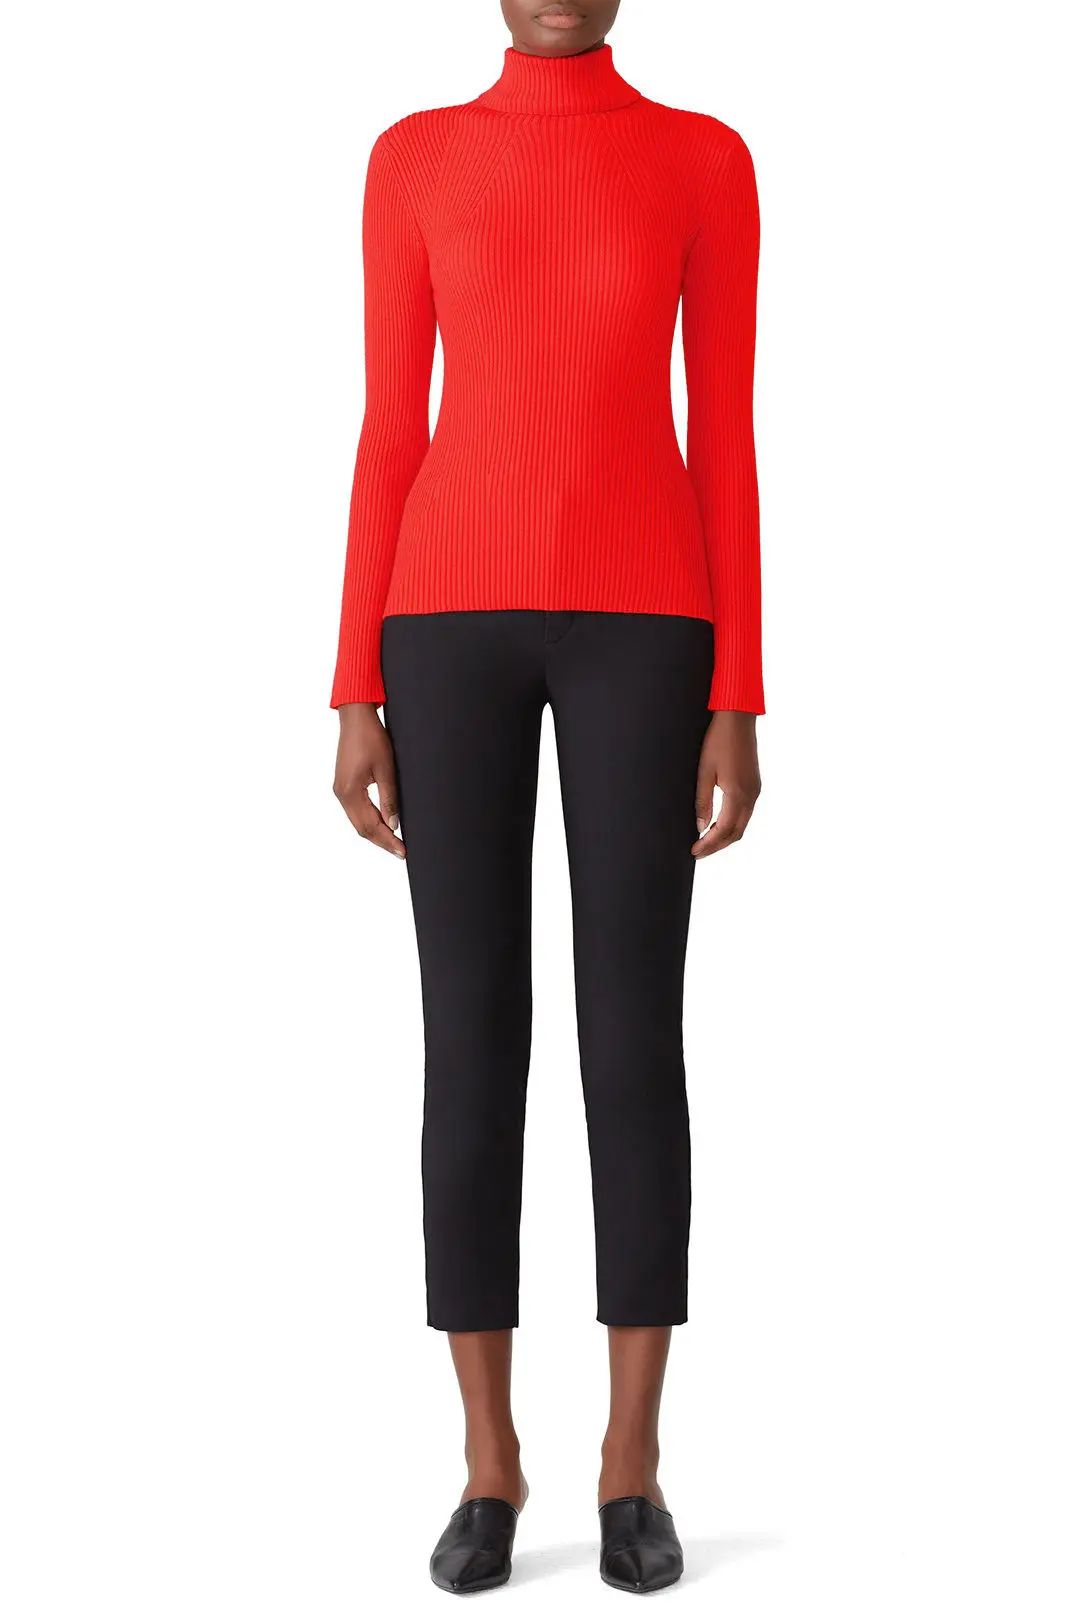 3.1 Phillip Lim Red Ribbed Turtleneck | Rent the Runway